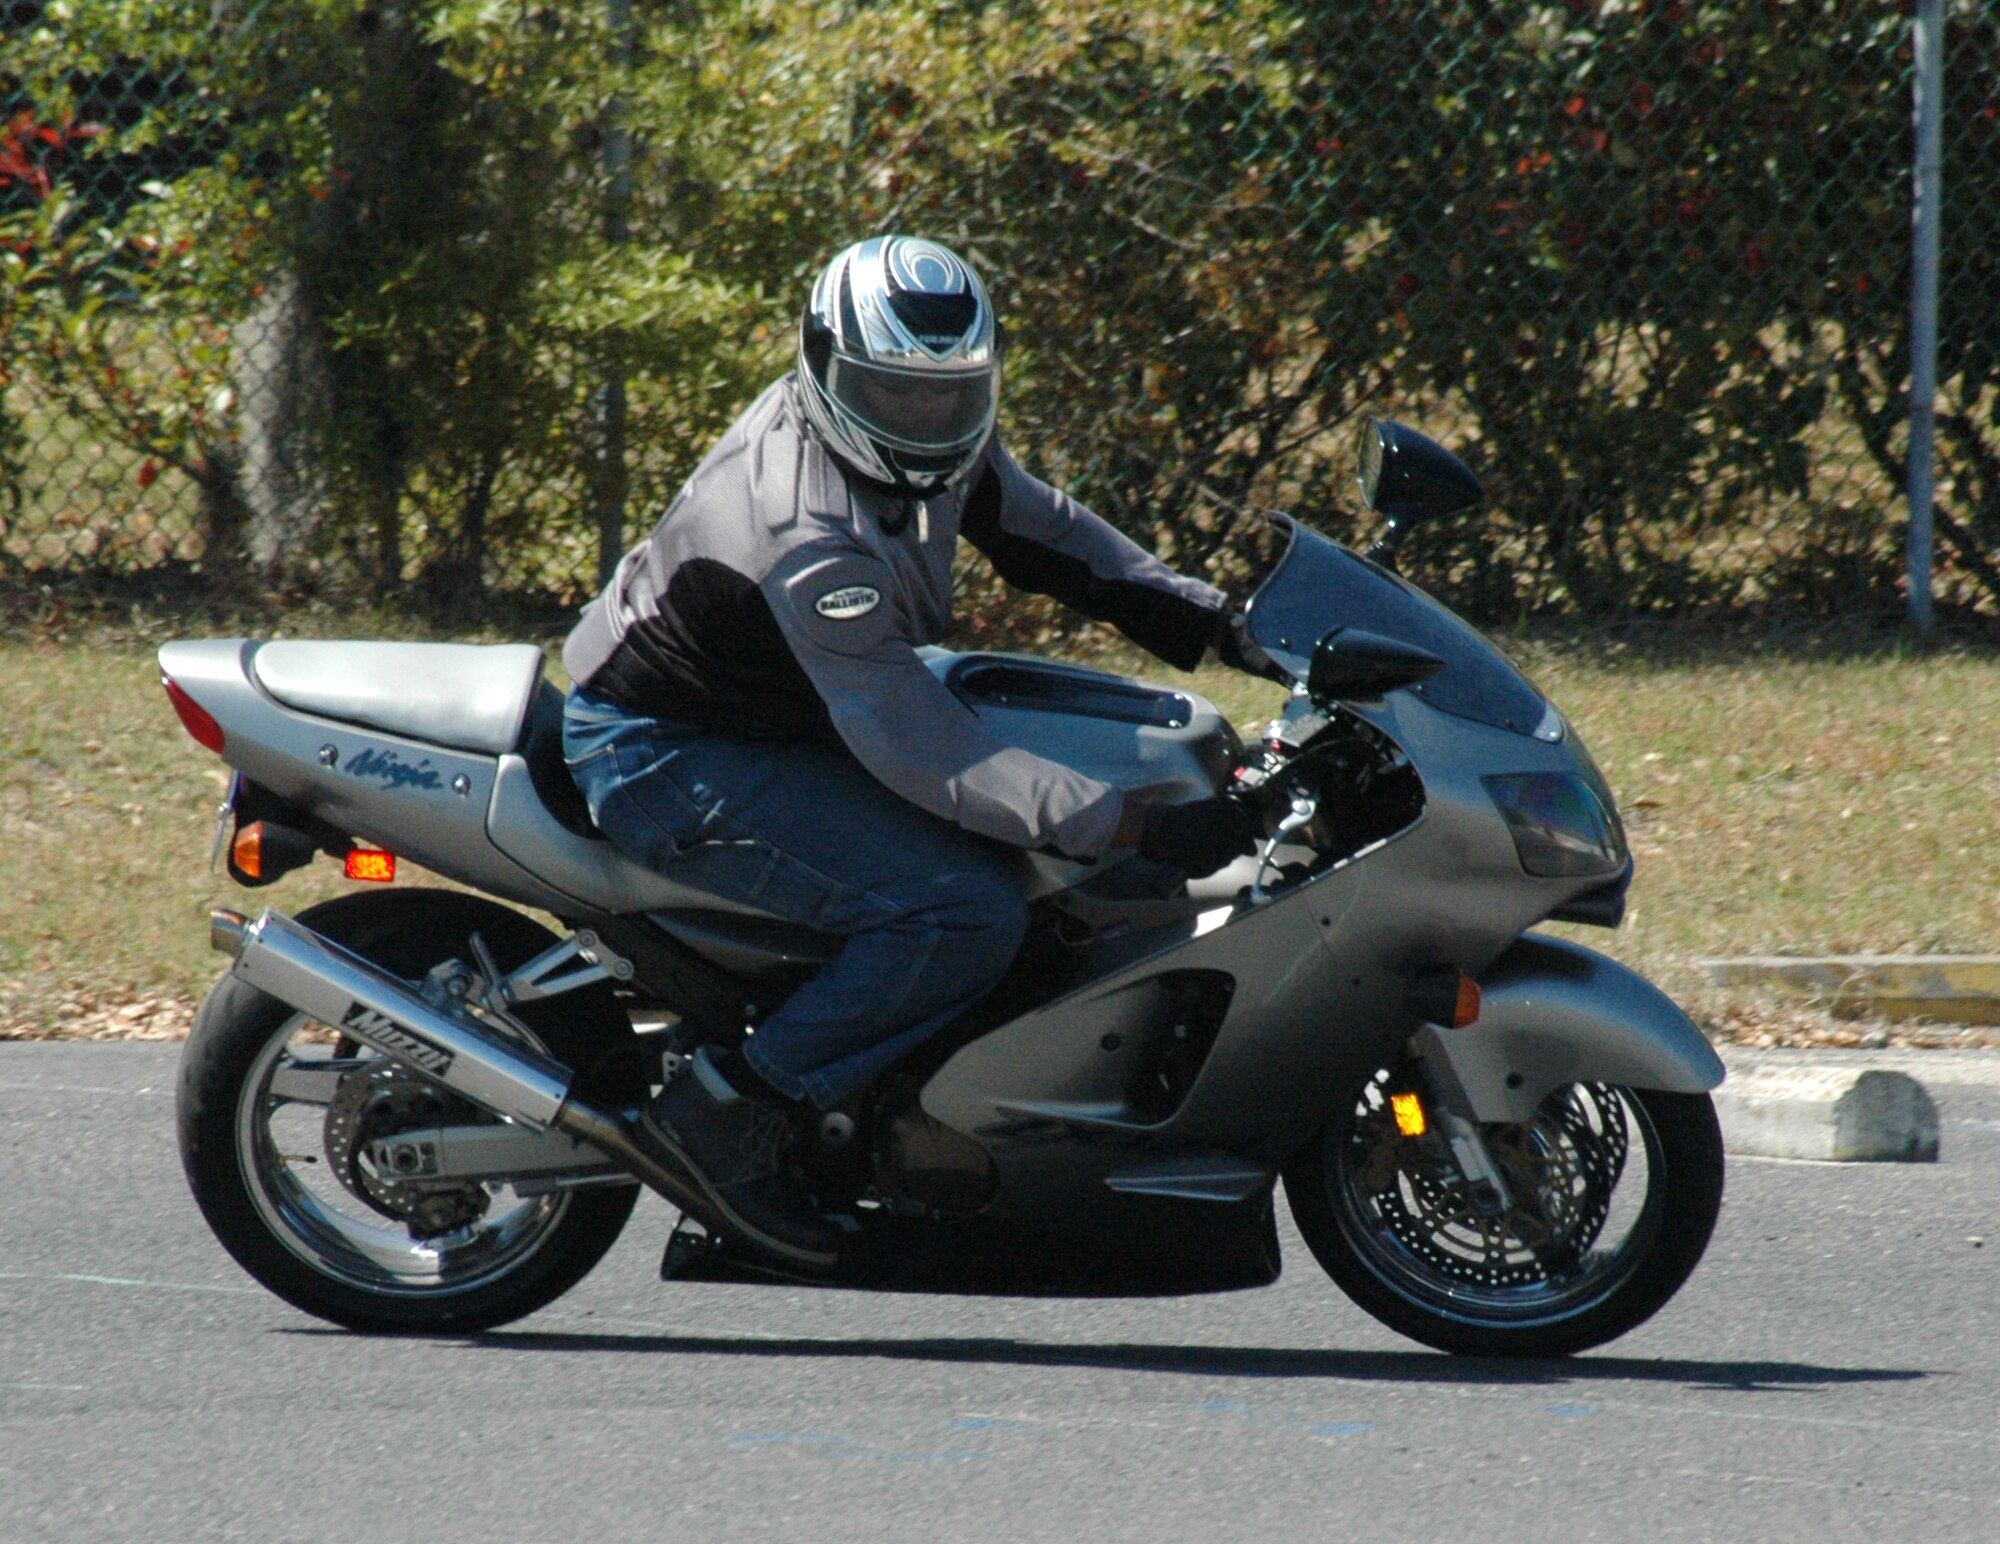 Senior Master Sgt. Tony Levine, 315th Operations Support Squadron, demonstrates a cornering technique for the students of the motorcycle safety course. Sergeant Levine was one of 11 rider coach candidates to complete the motorcycle safety instructor's course hosted by Charleston Air Force Base.  (Photo by Tech. Sgt. Mary Hinson, USAFR)